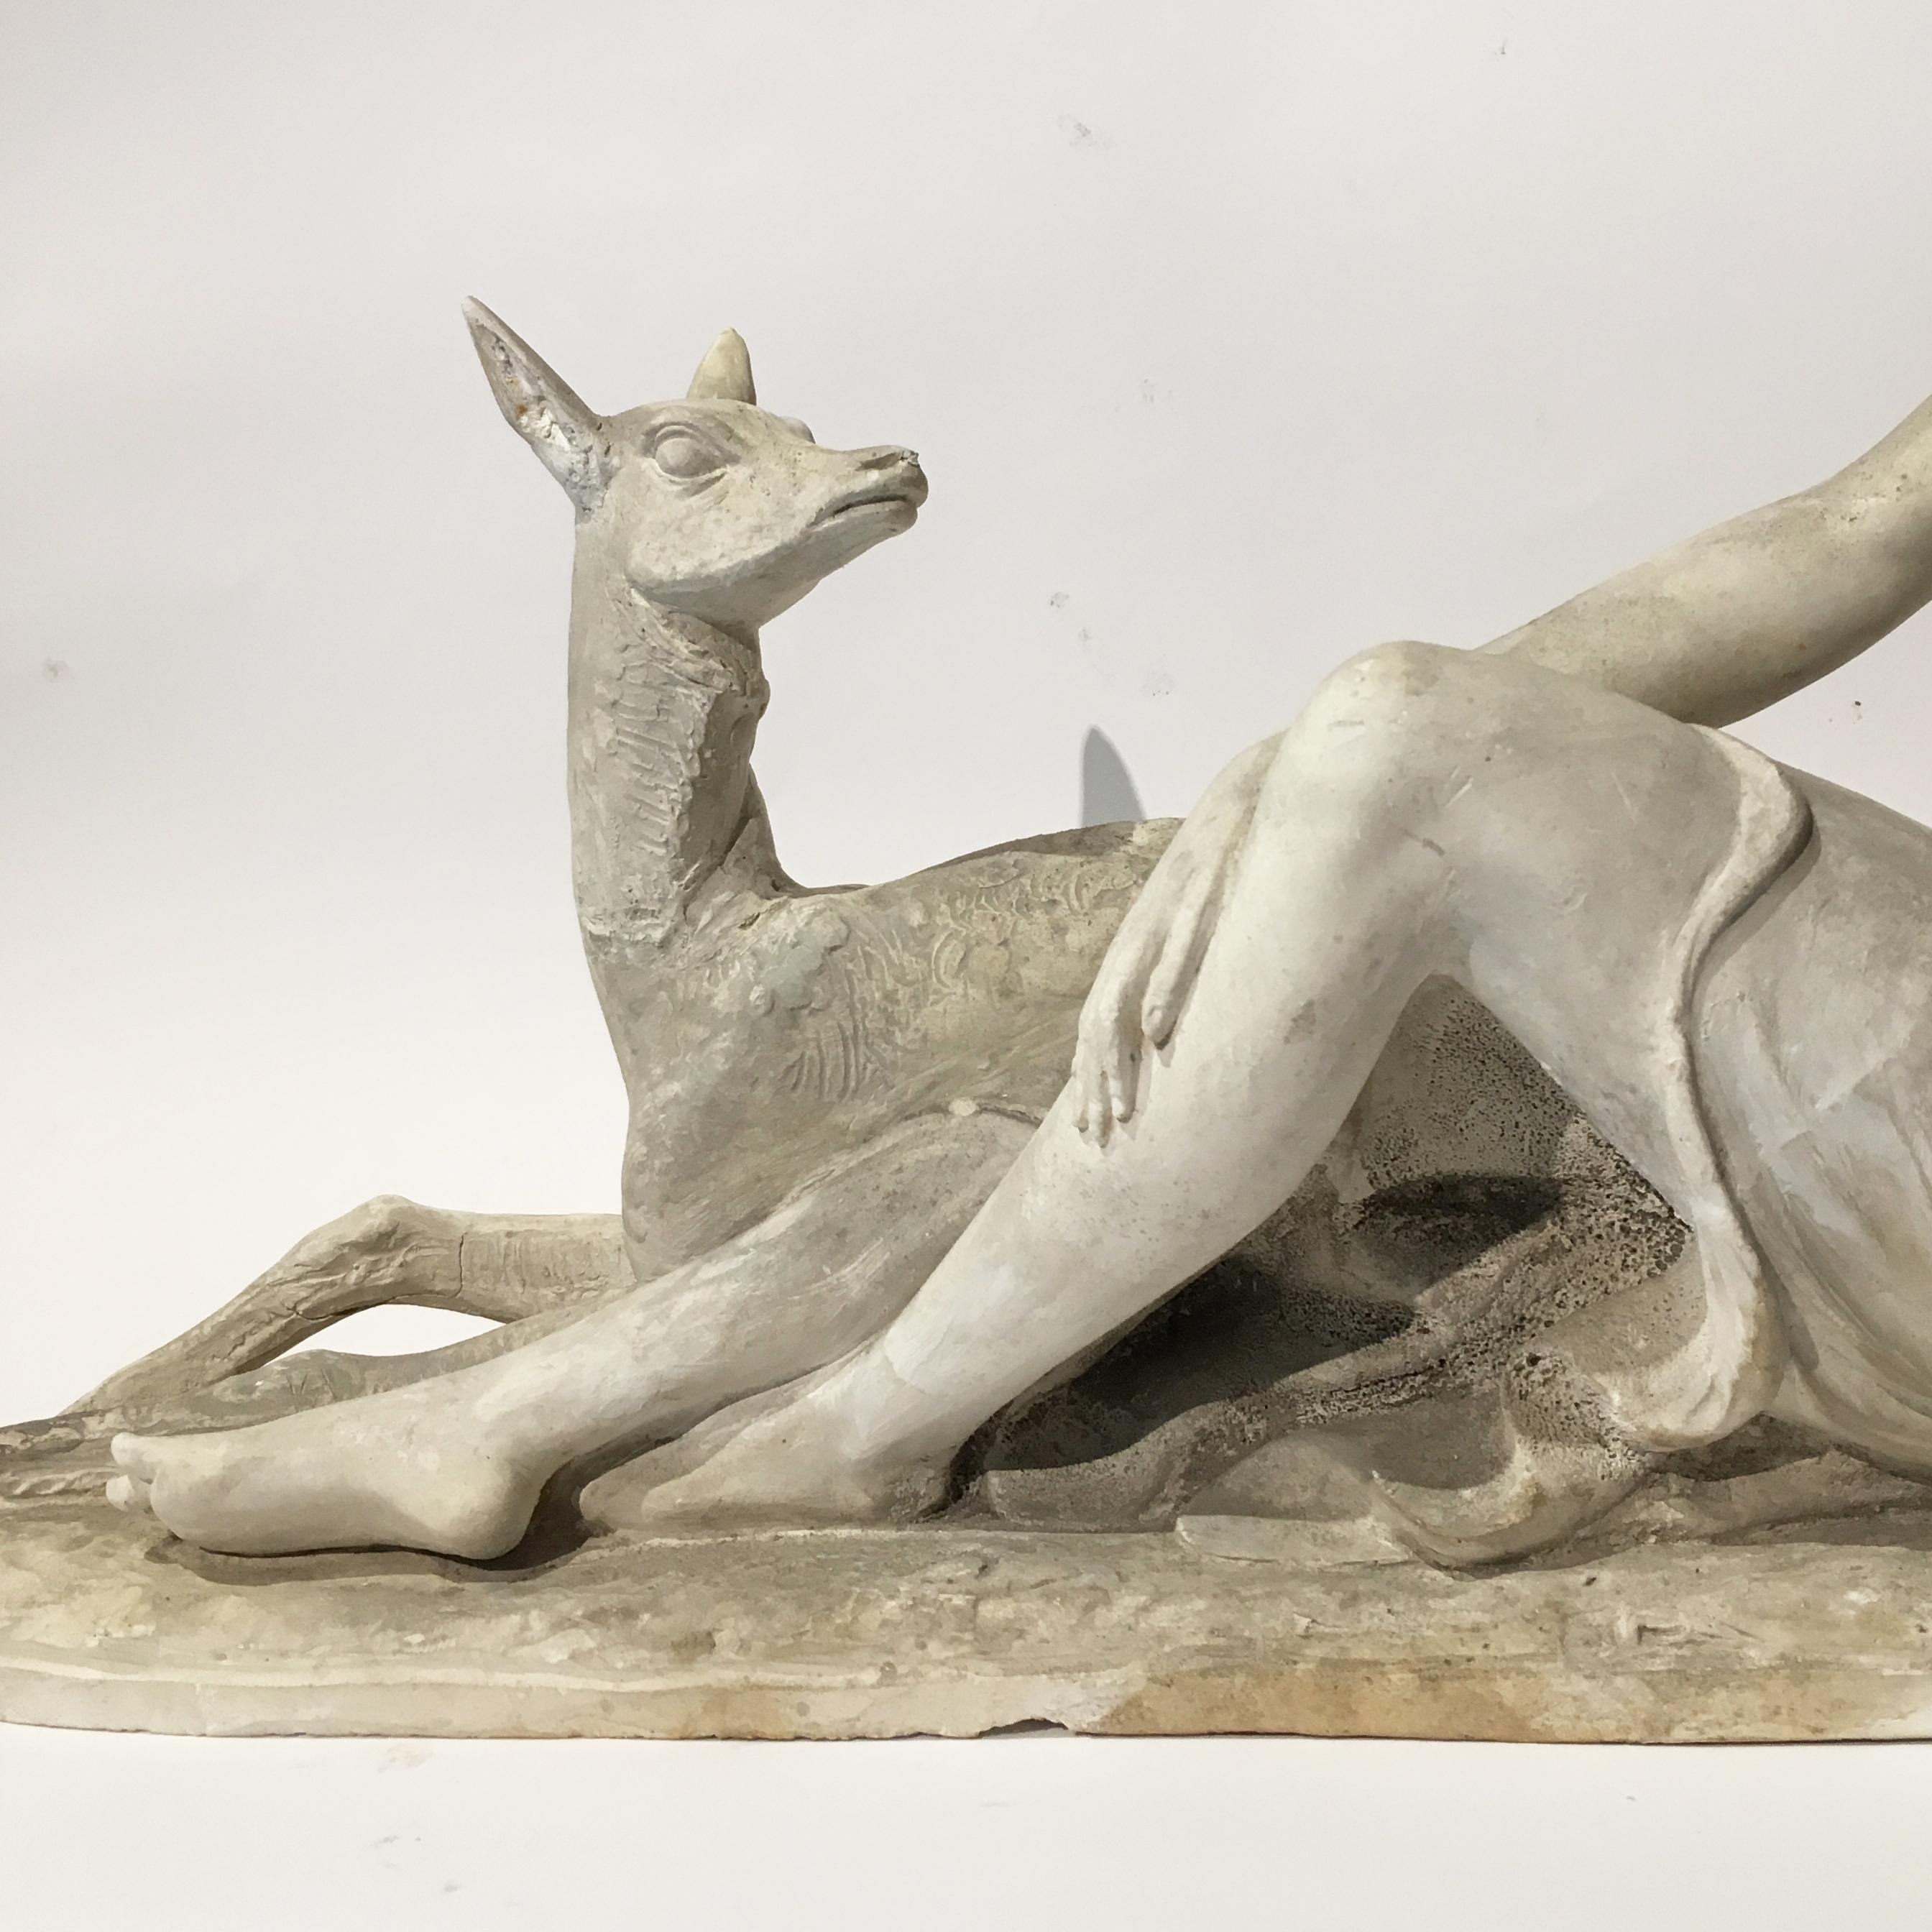 Early 20th Century Italian Art Deco Plaster Sculpture by Mario Bandini For Sale 8